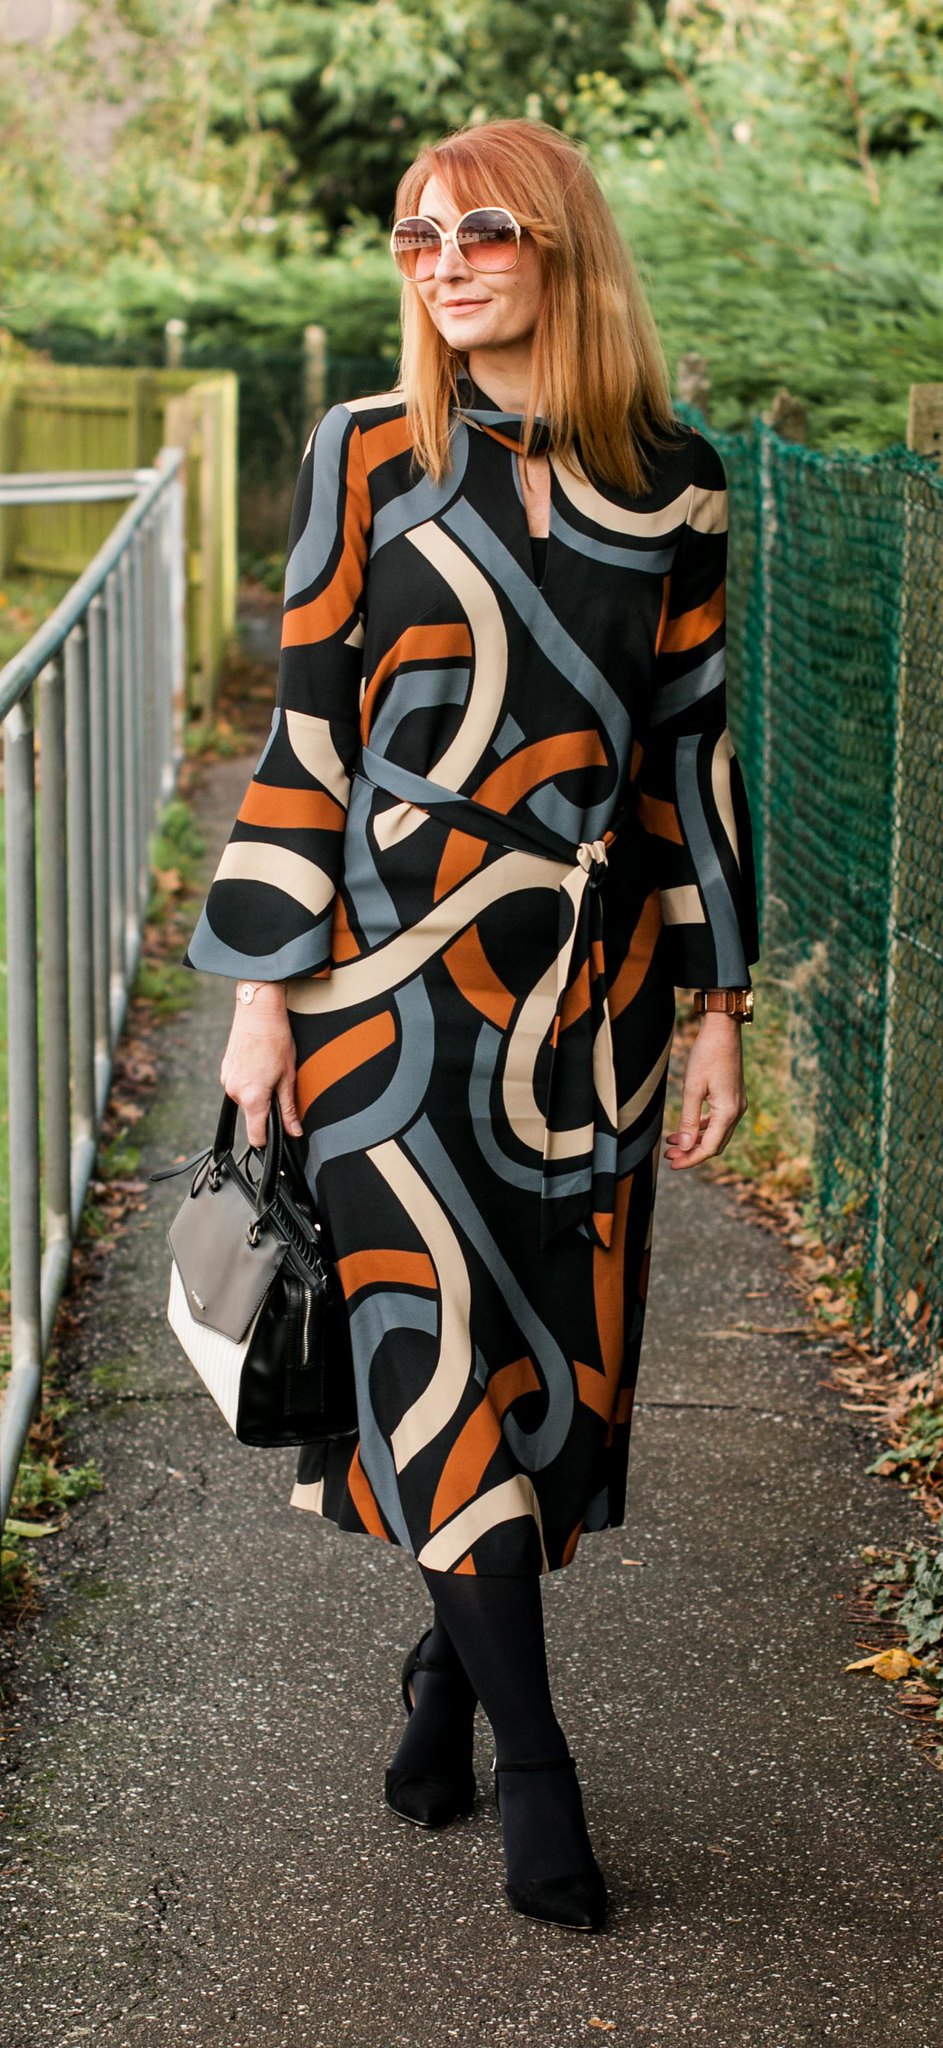 Elegant 70s style patterned midi dress in autumnal colours - bell sleeves, tie waist (Hobbs AW17) | Not DRessed As Lamb, over 40 style